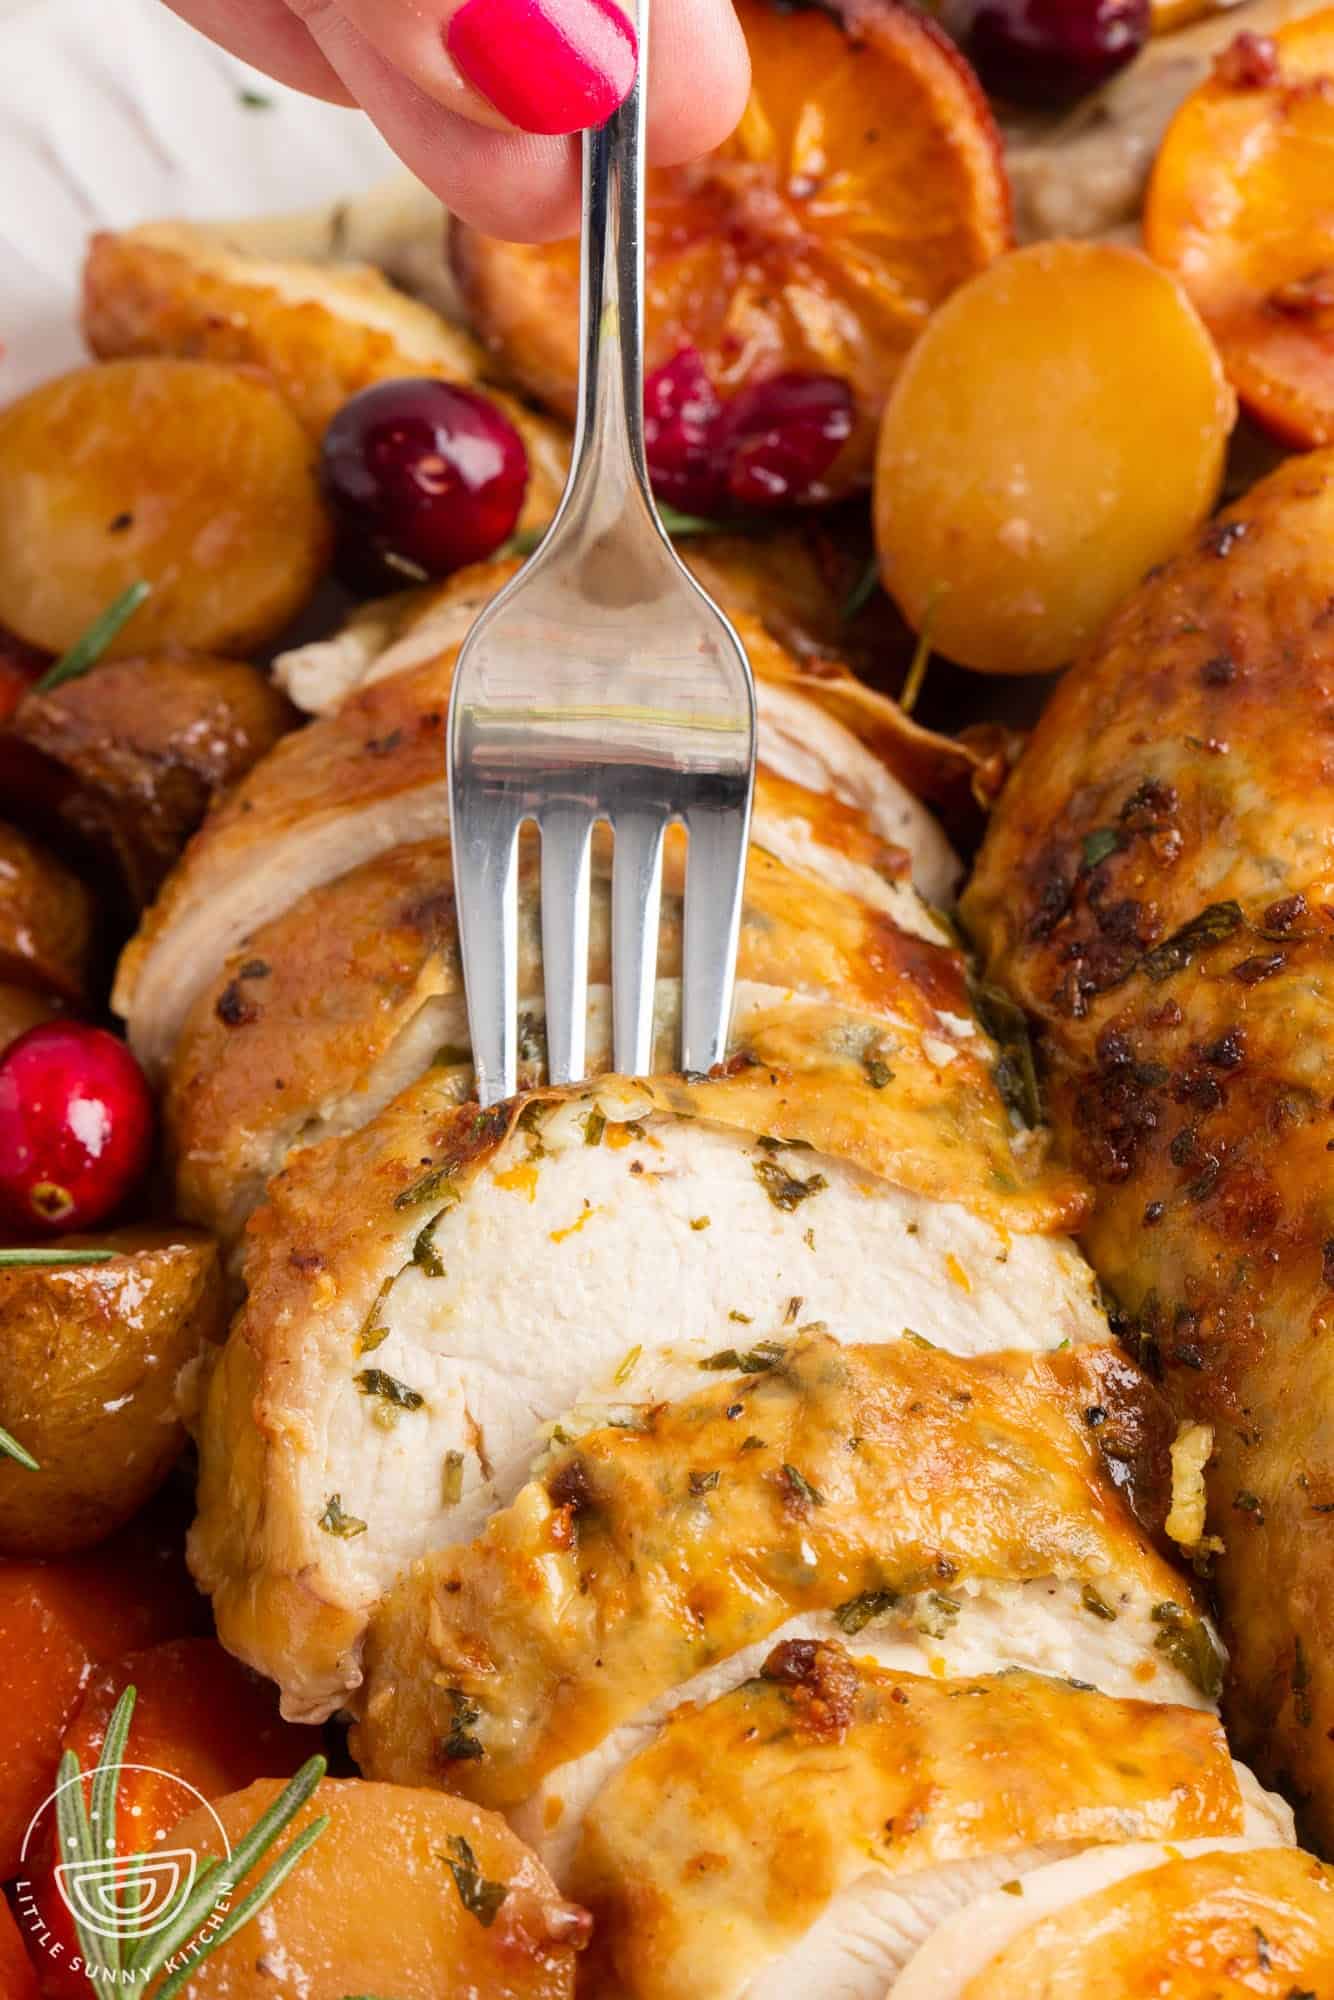 sliced christmas chicken with oranges, potatoes, and cranberries. A fork is about to pick up a piece.